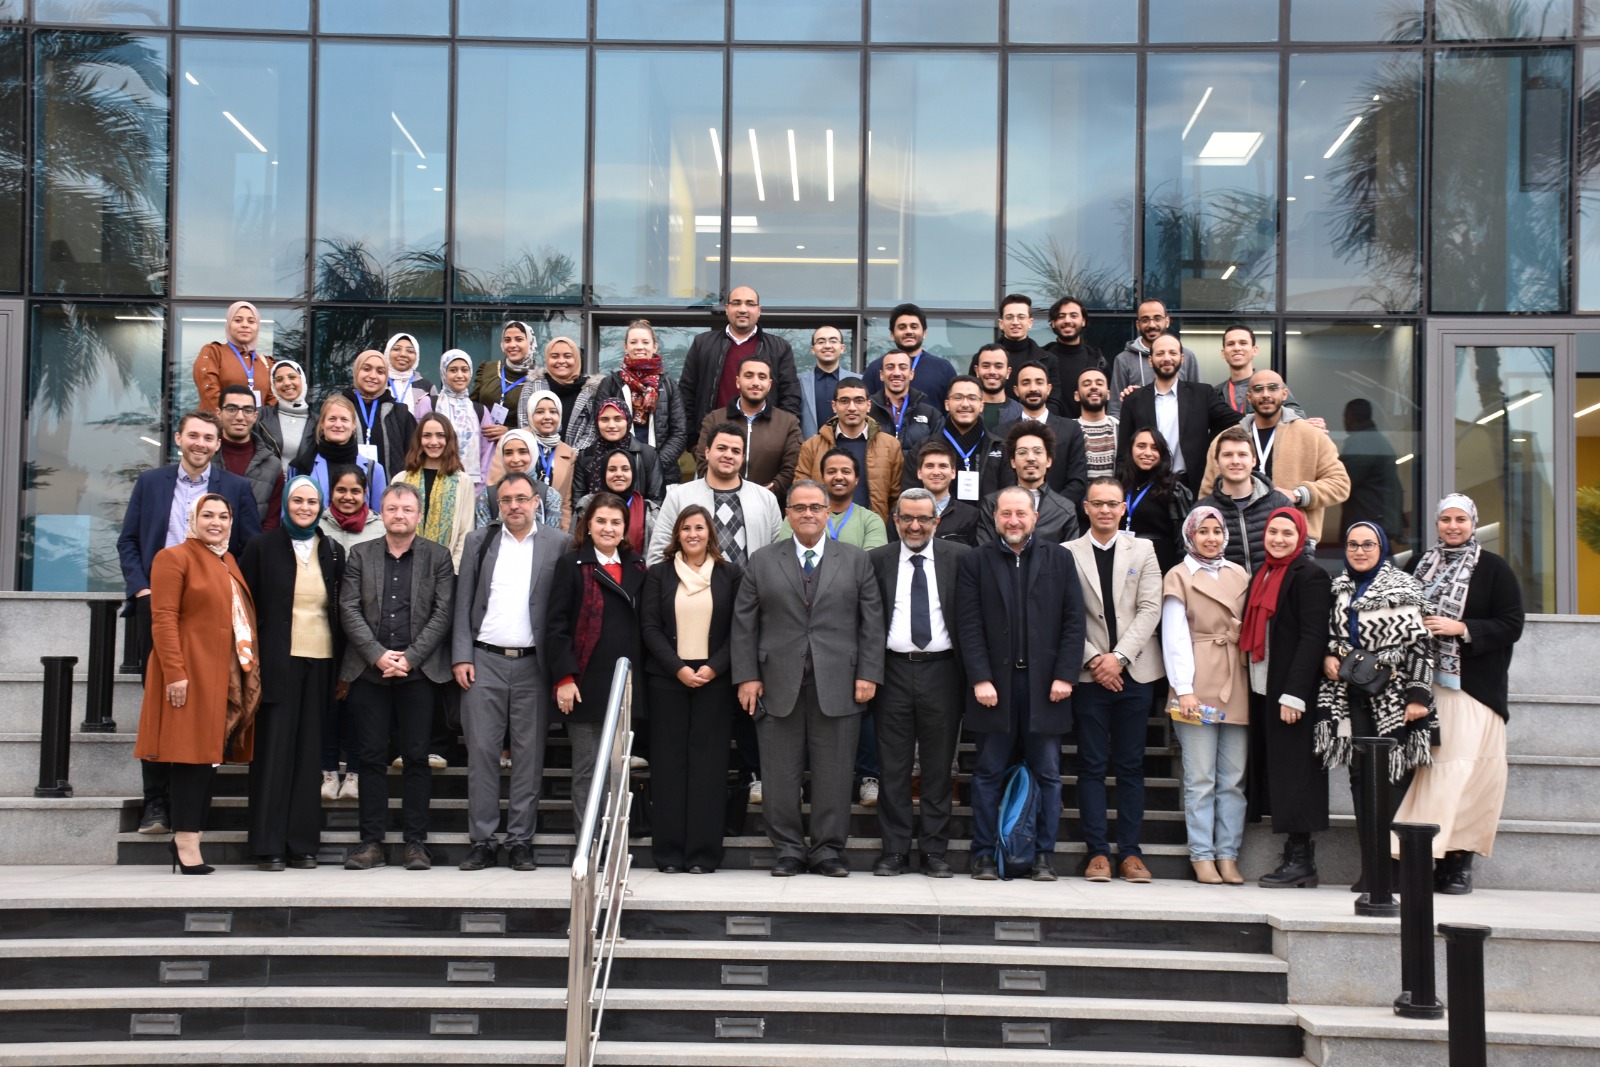 The conclusion of the activities of the winter training camp of the Innovation and Entrepreneurship Center, in cooperation with its counterpart at the Technical University of Berlin